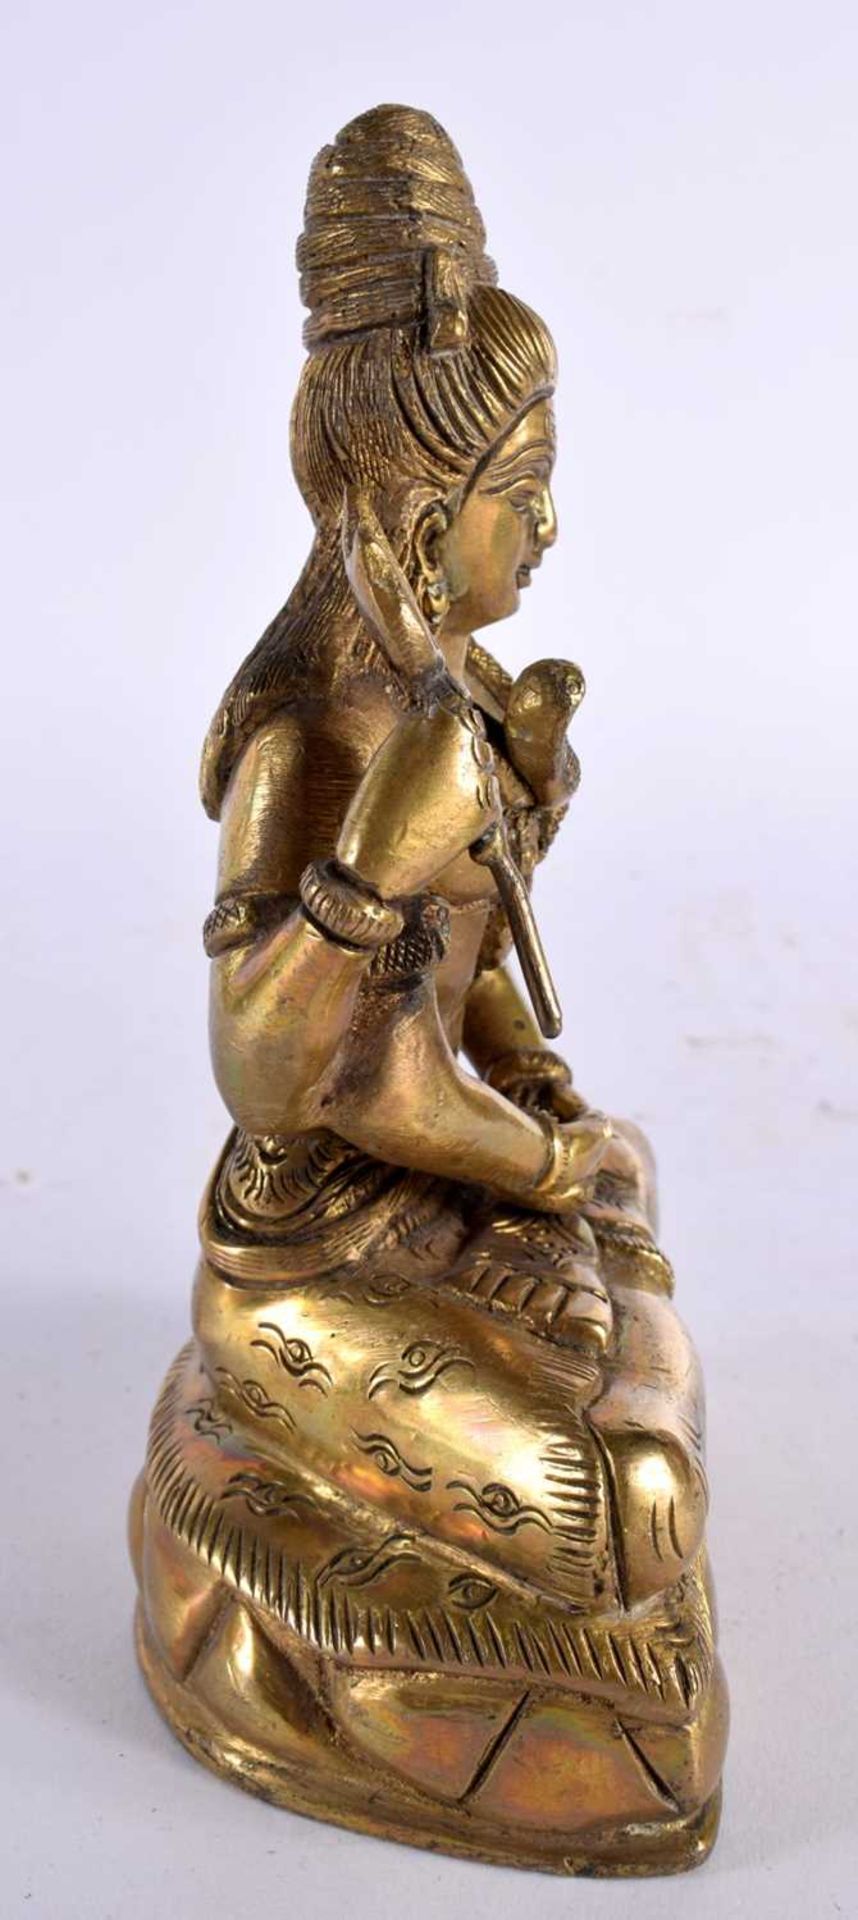 A 19TH CENTURY INDIAN BRONZE HINDU FIGURE OF SHIVA modelled seated on a lion skin with vasuki, - Image 7 of 8